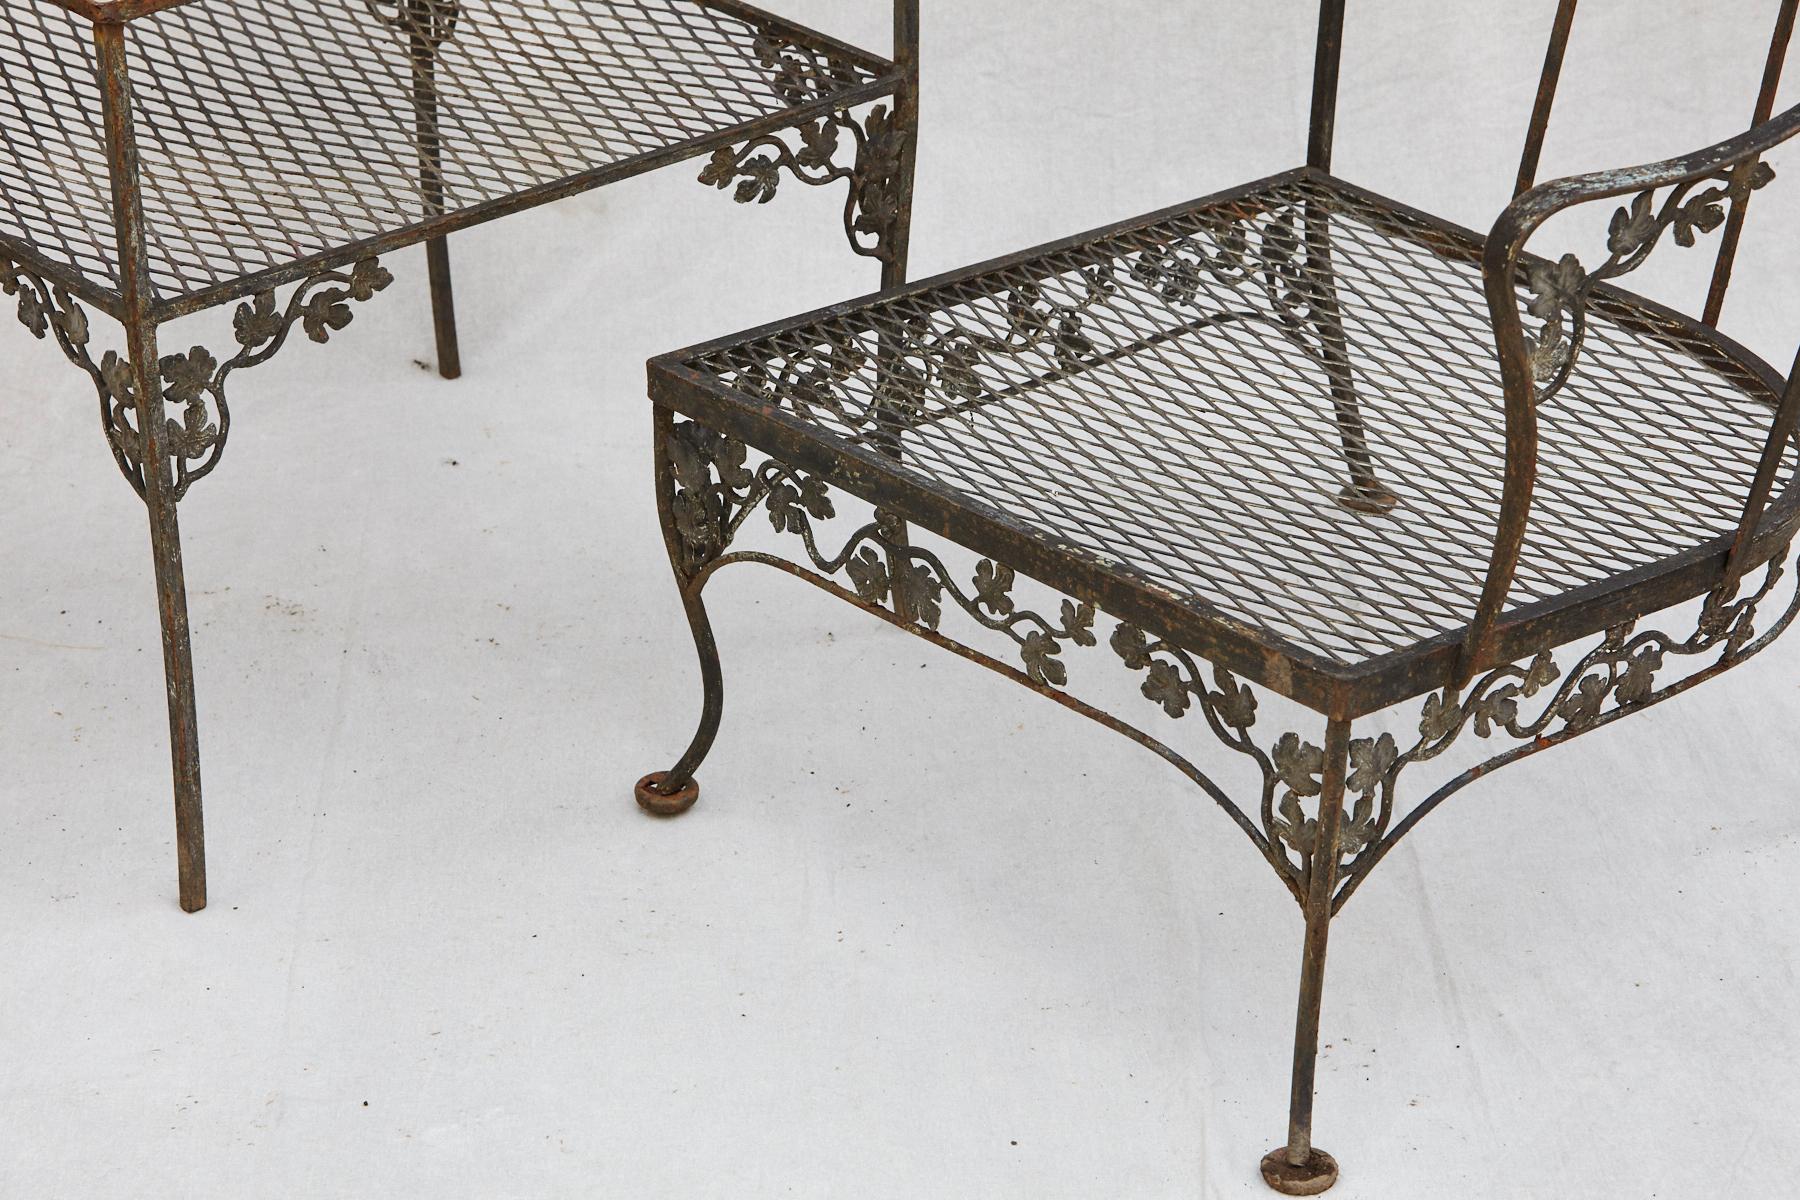 Grouping of Woodard Wrought Iron Garden Corner Chairs with Matching Side Table 2